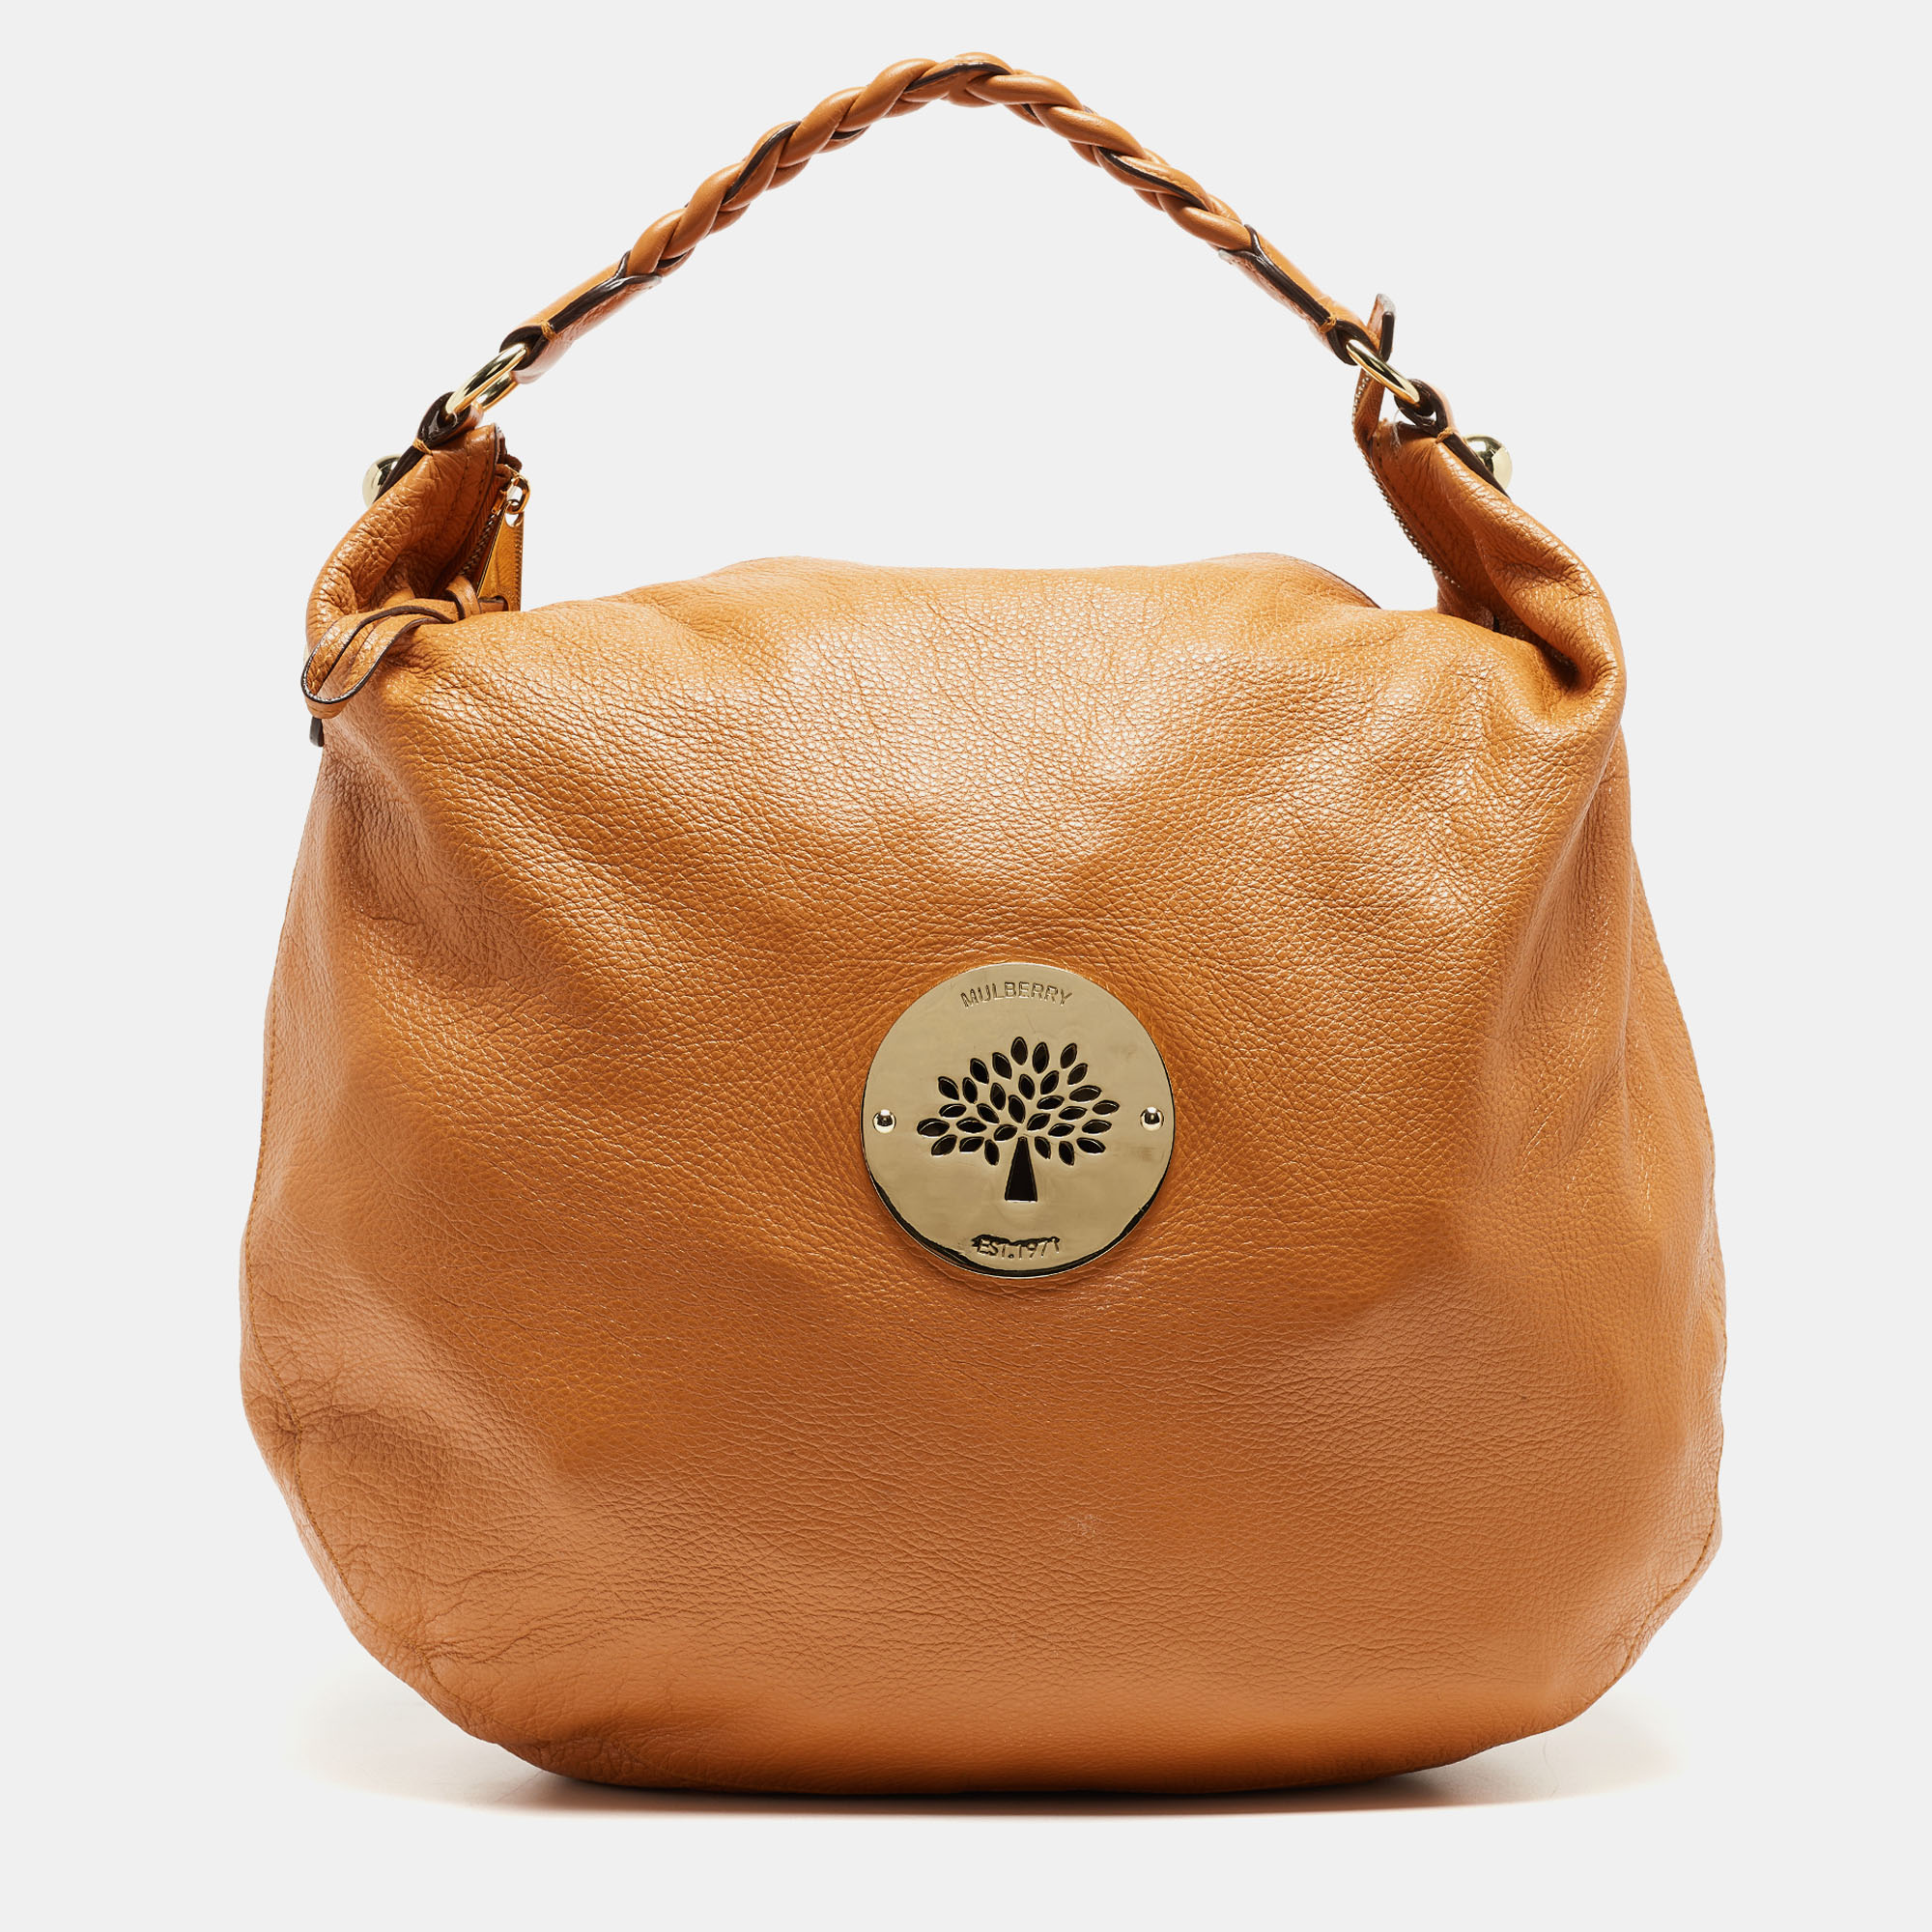 Pre-owned Mulberry Tan Leather Large Daria Hobo